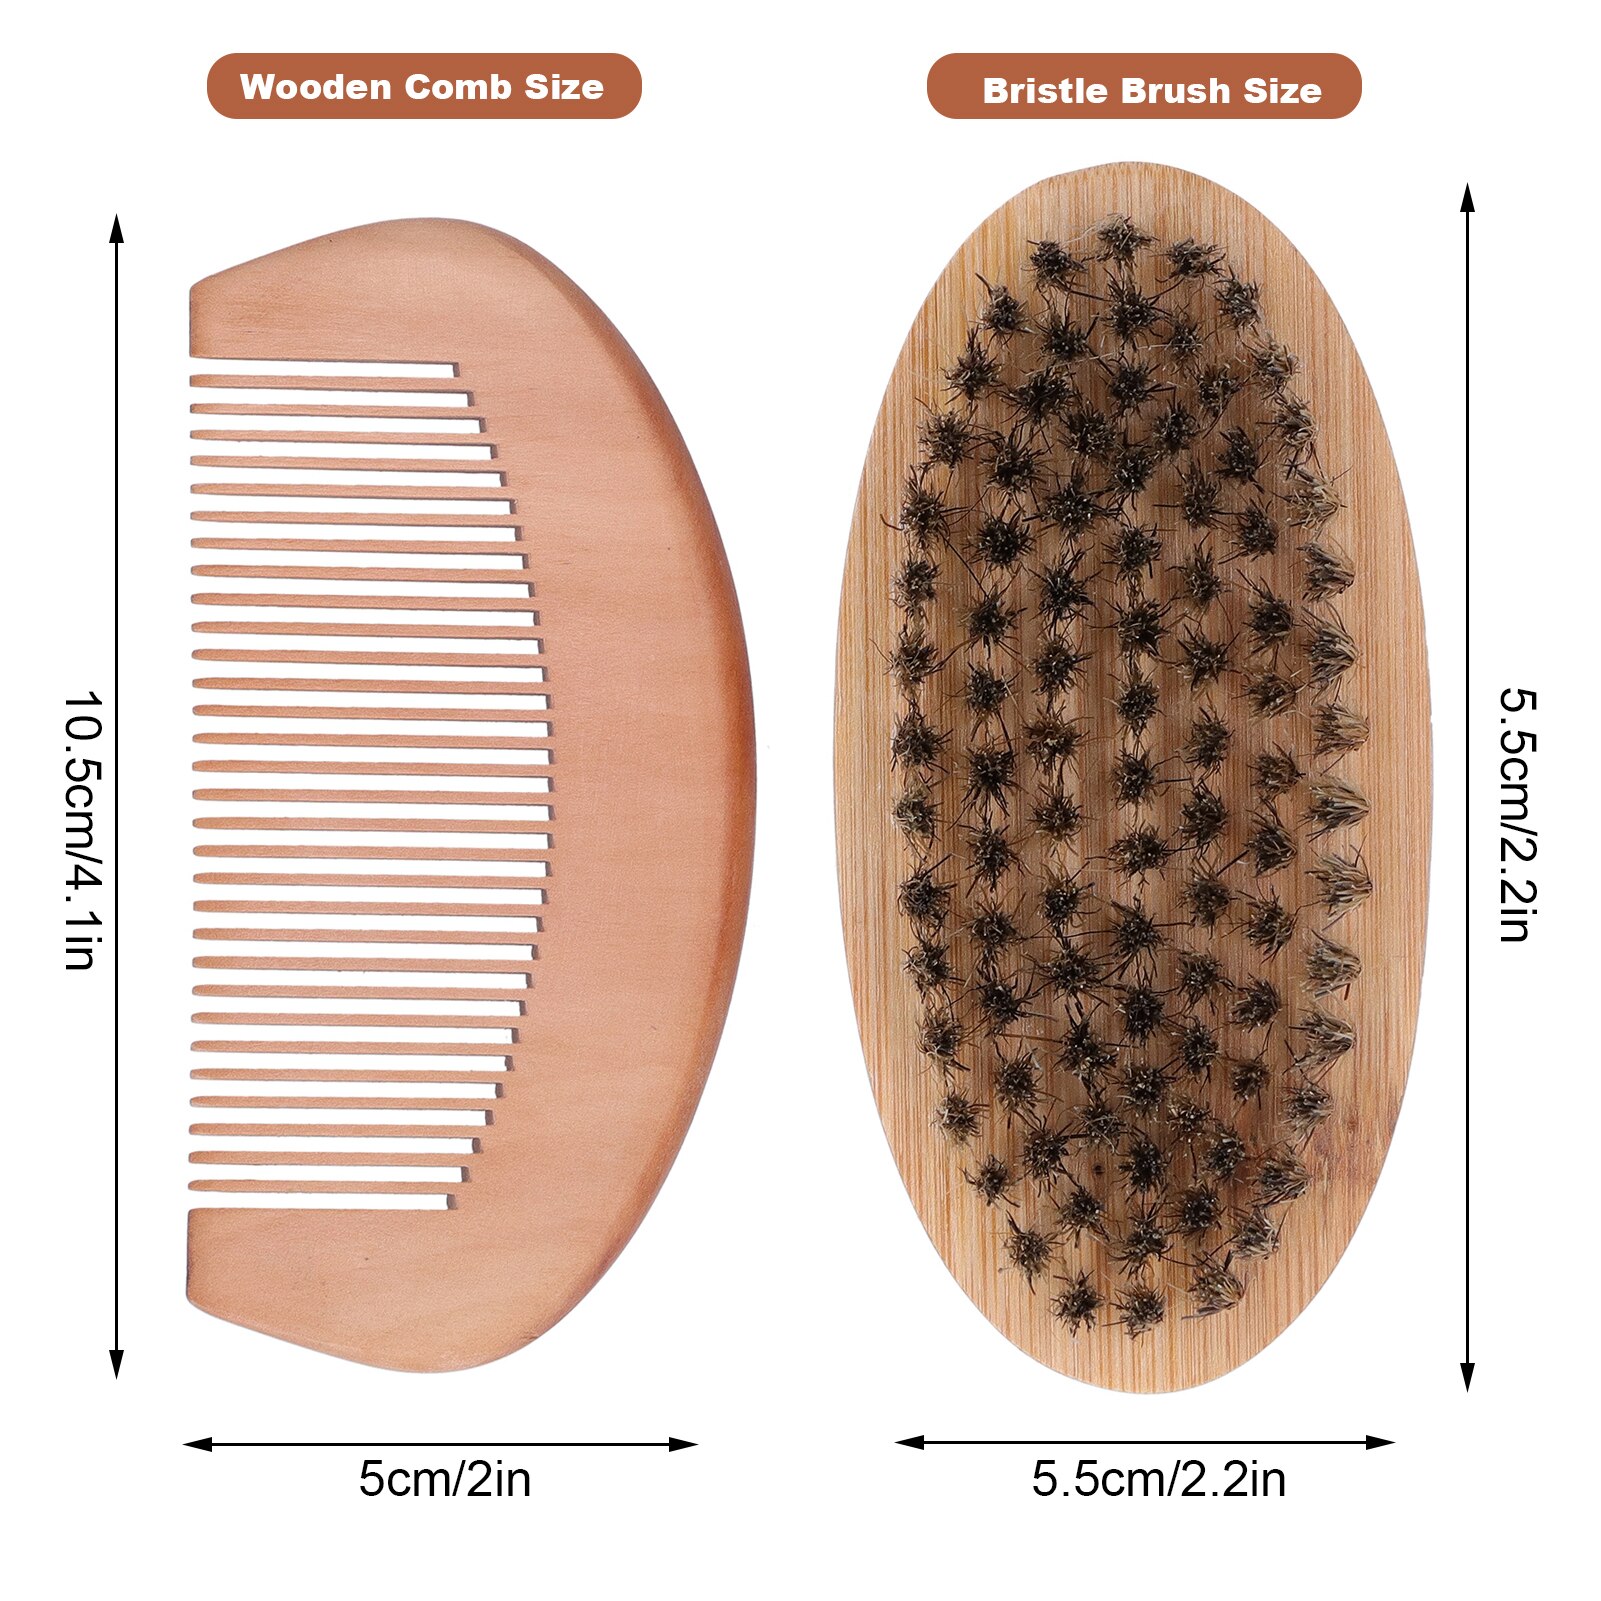 Mens Aftershave Male Care Men Beard Grooming Kit Mustache Oval Brush and Beard Massage Comb Wooden Bristle Beard Balm Male